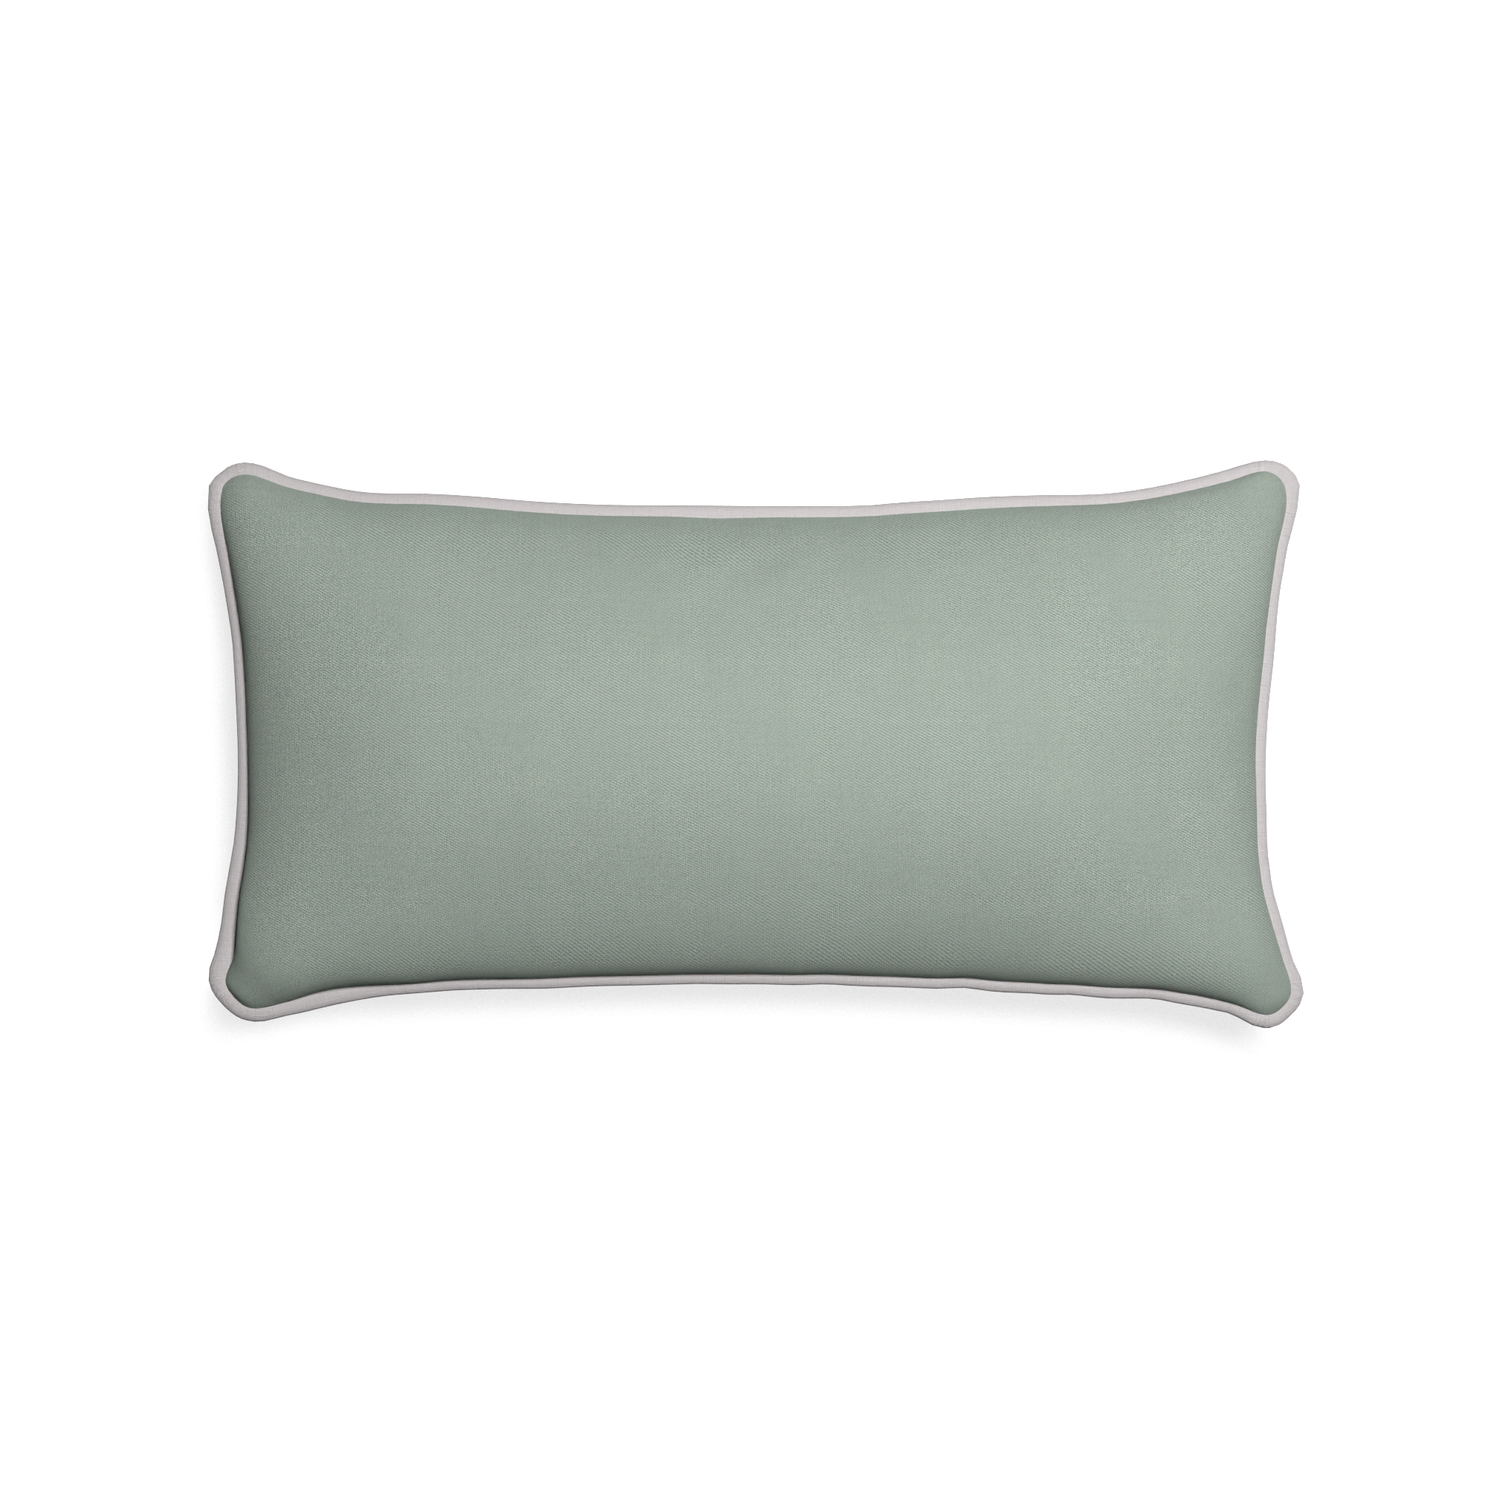 Midi-lumbar sage custom sage green cottonpillow with pebble piping on white background